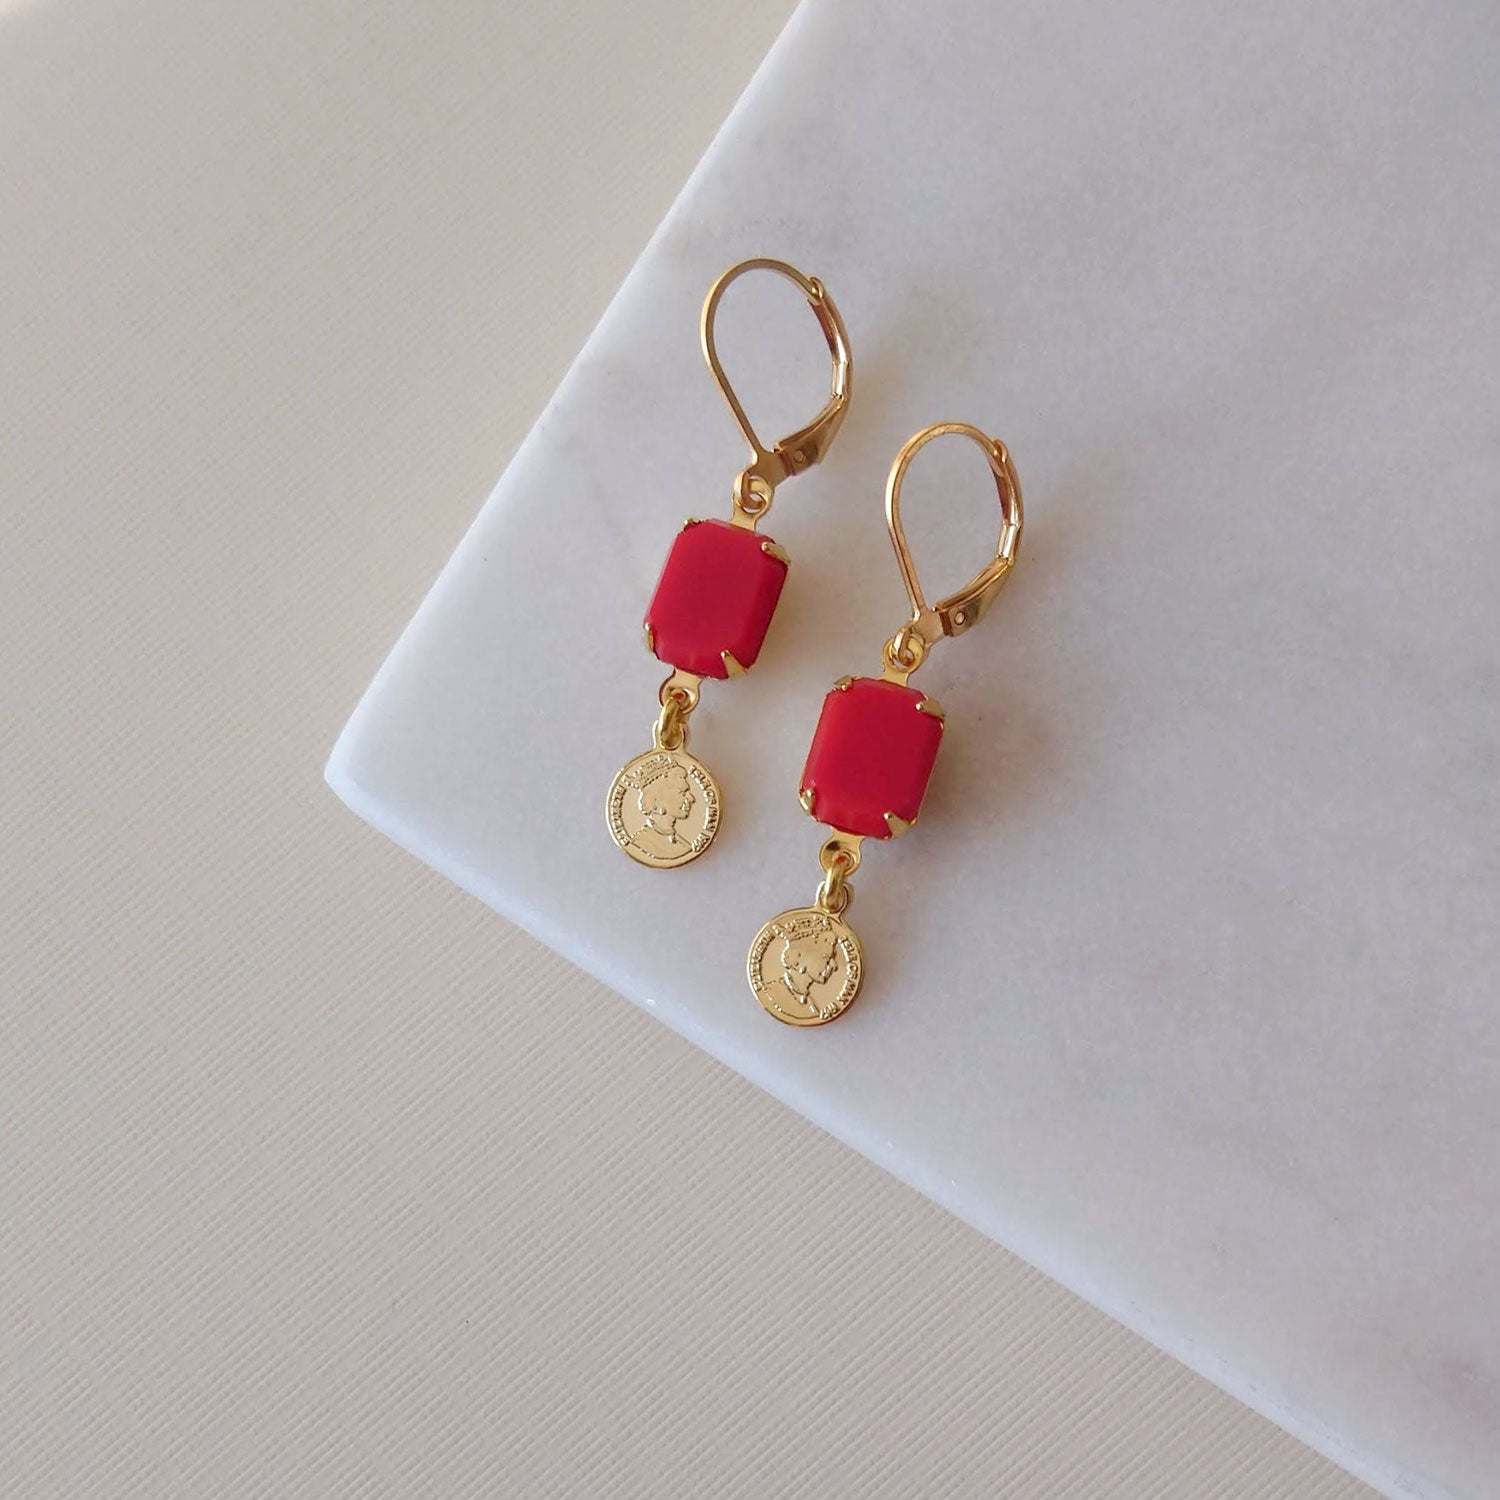 Cherry red earrings lucky charm coin